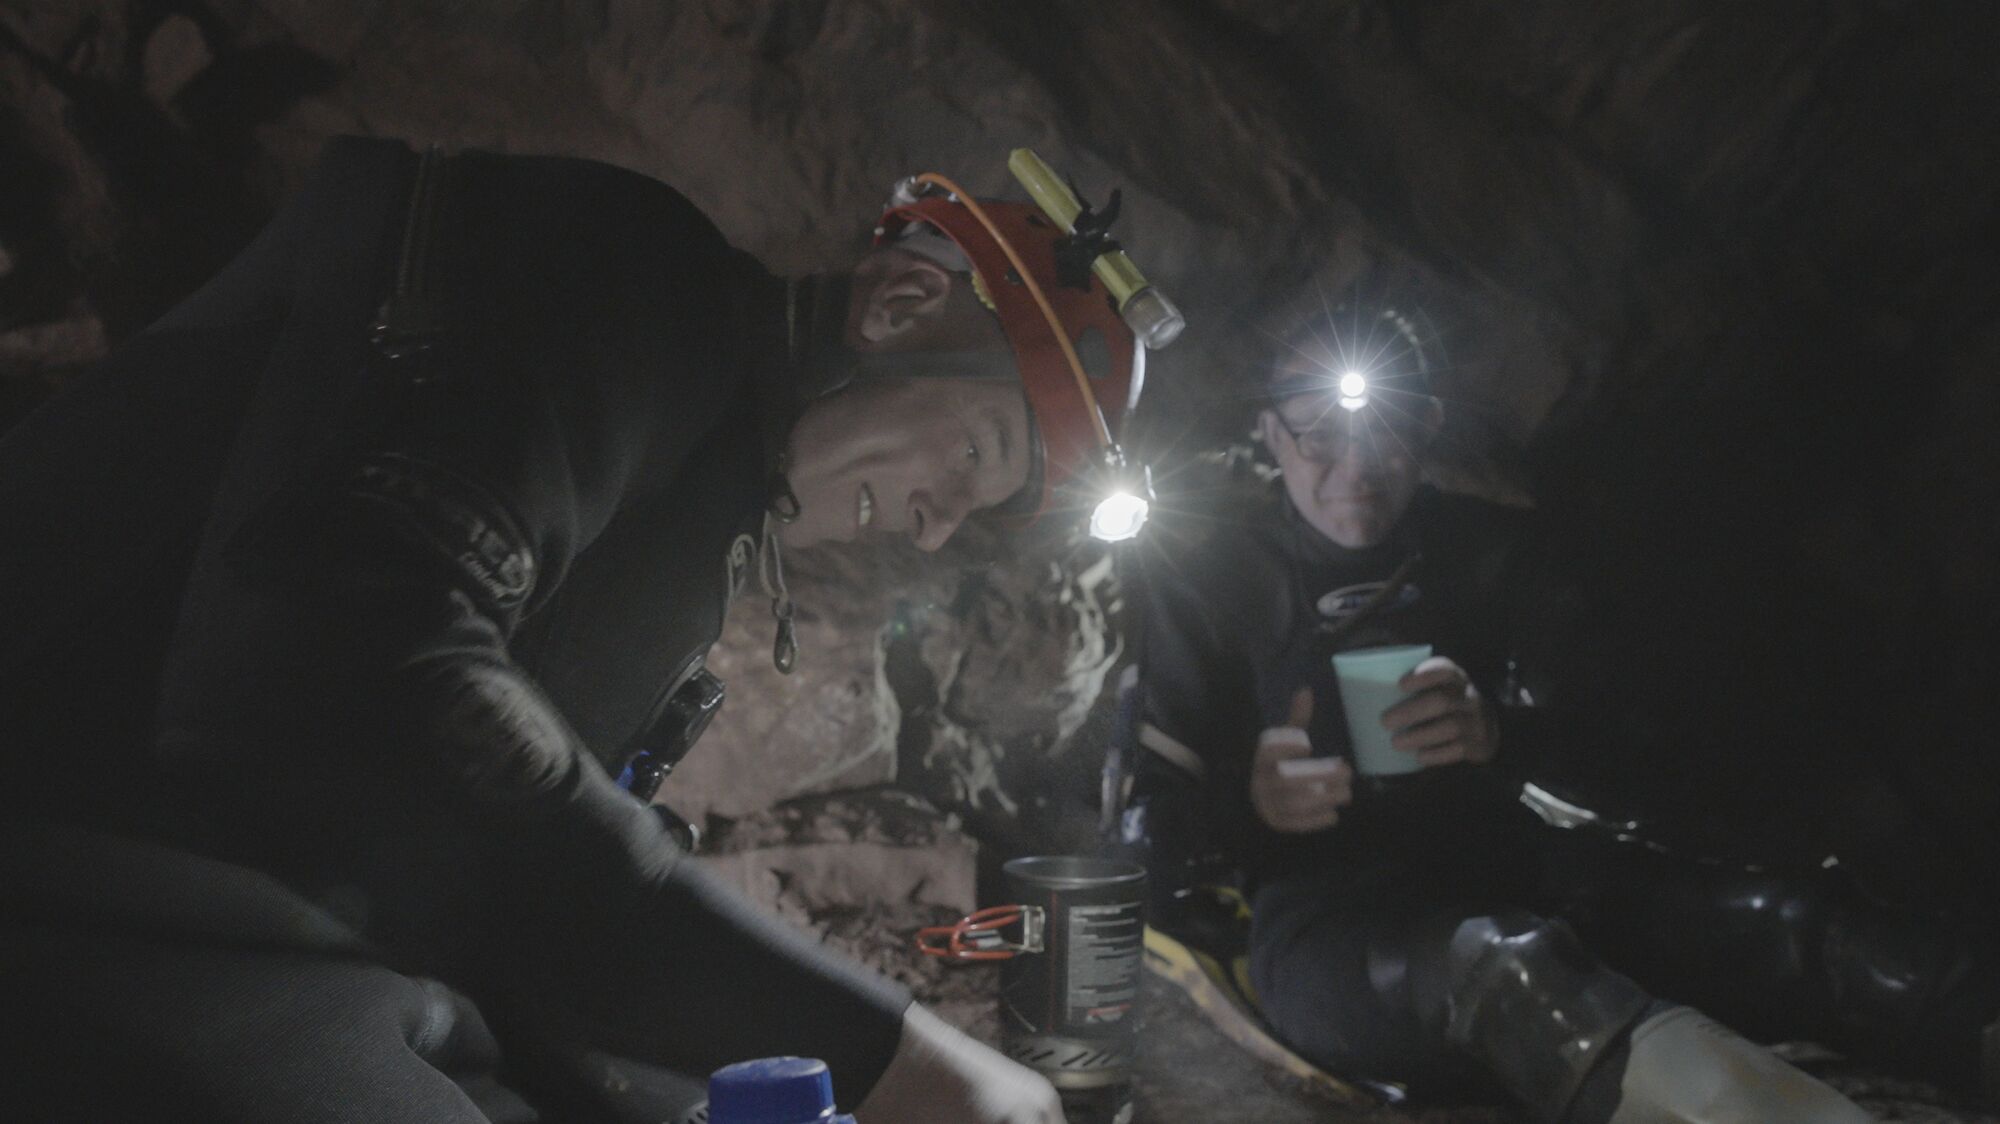 Two divers take a break inside a cave